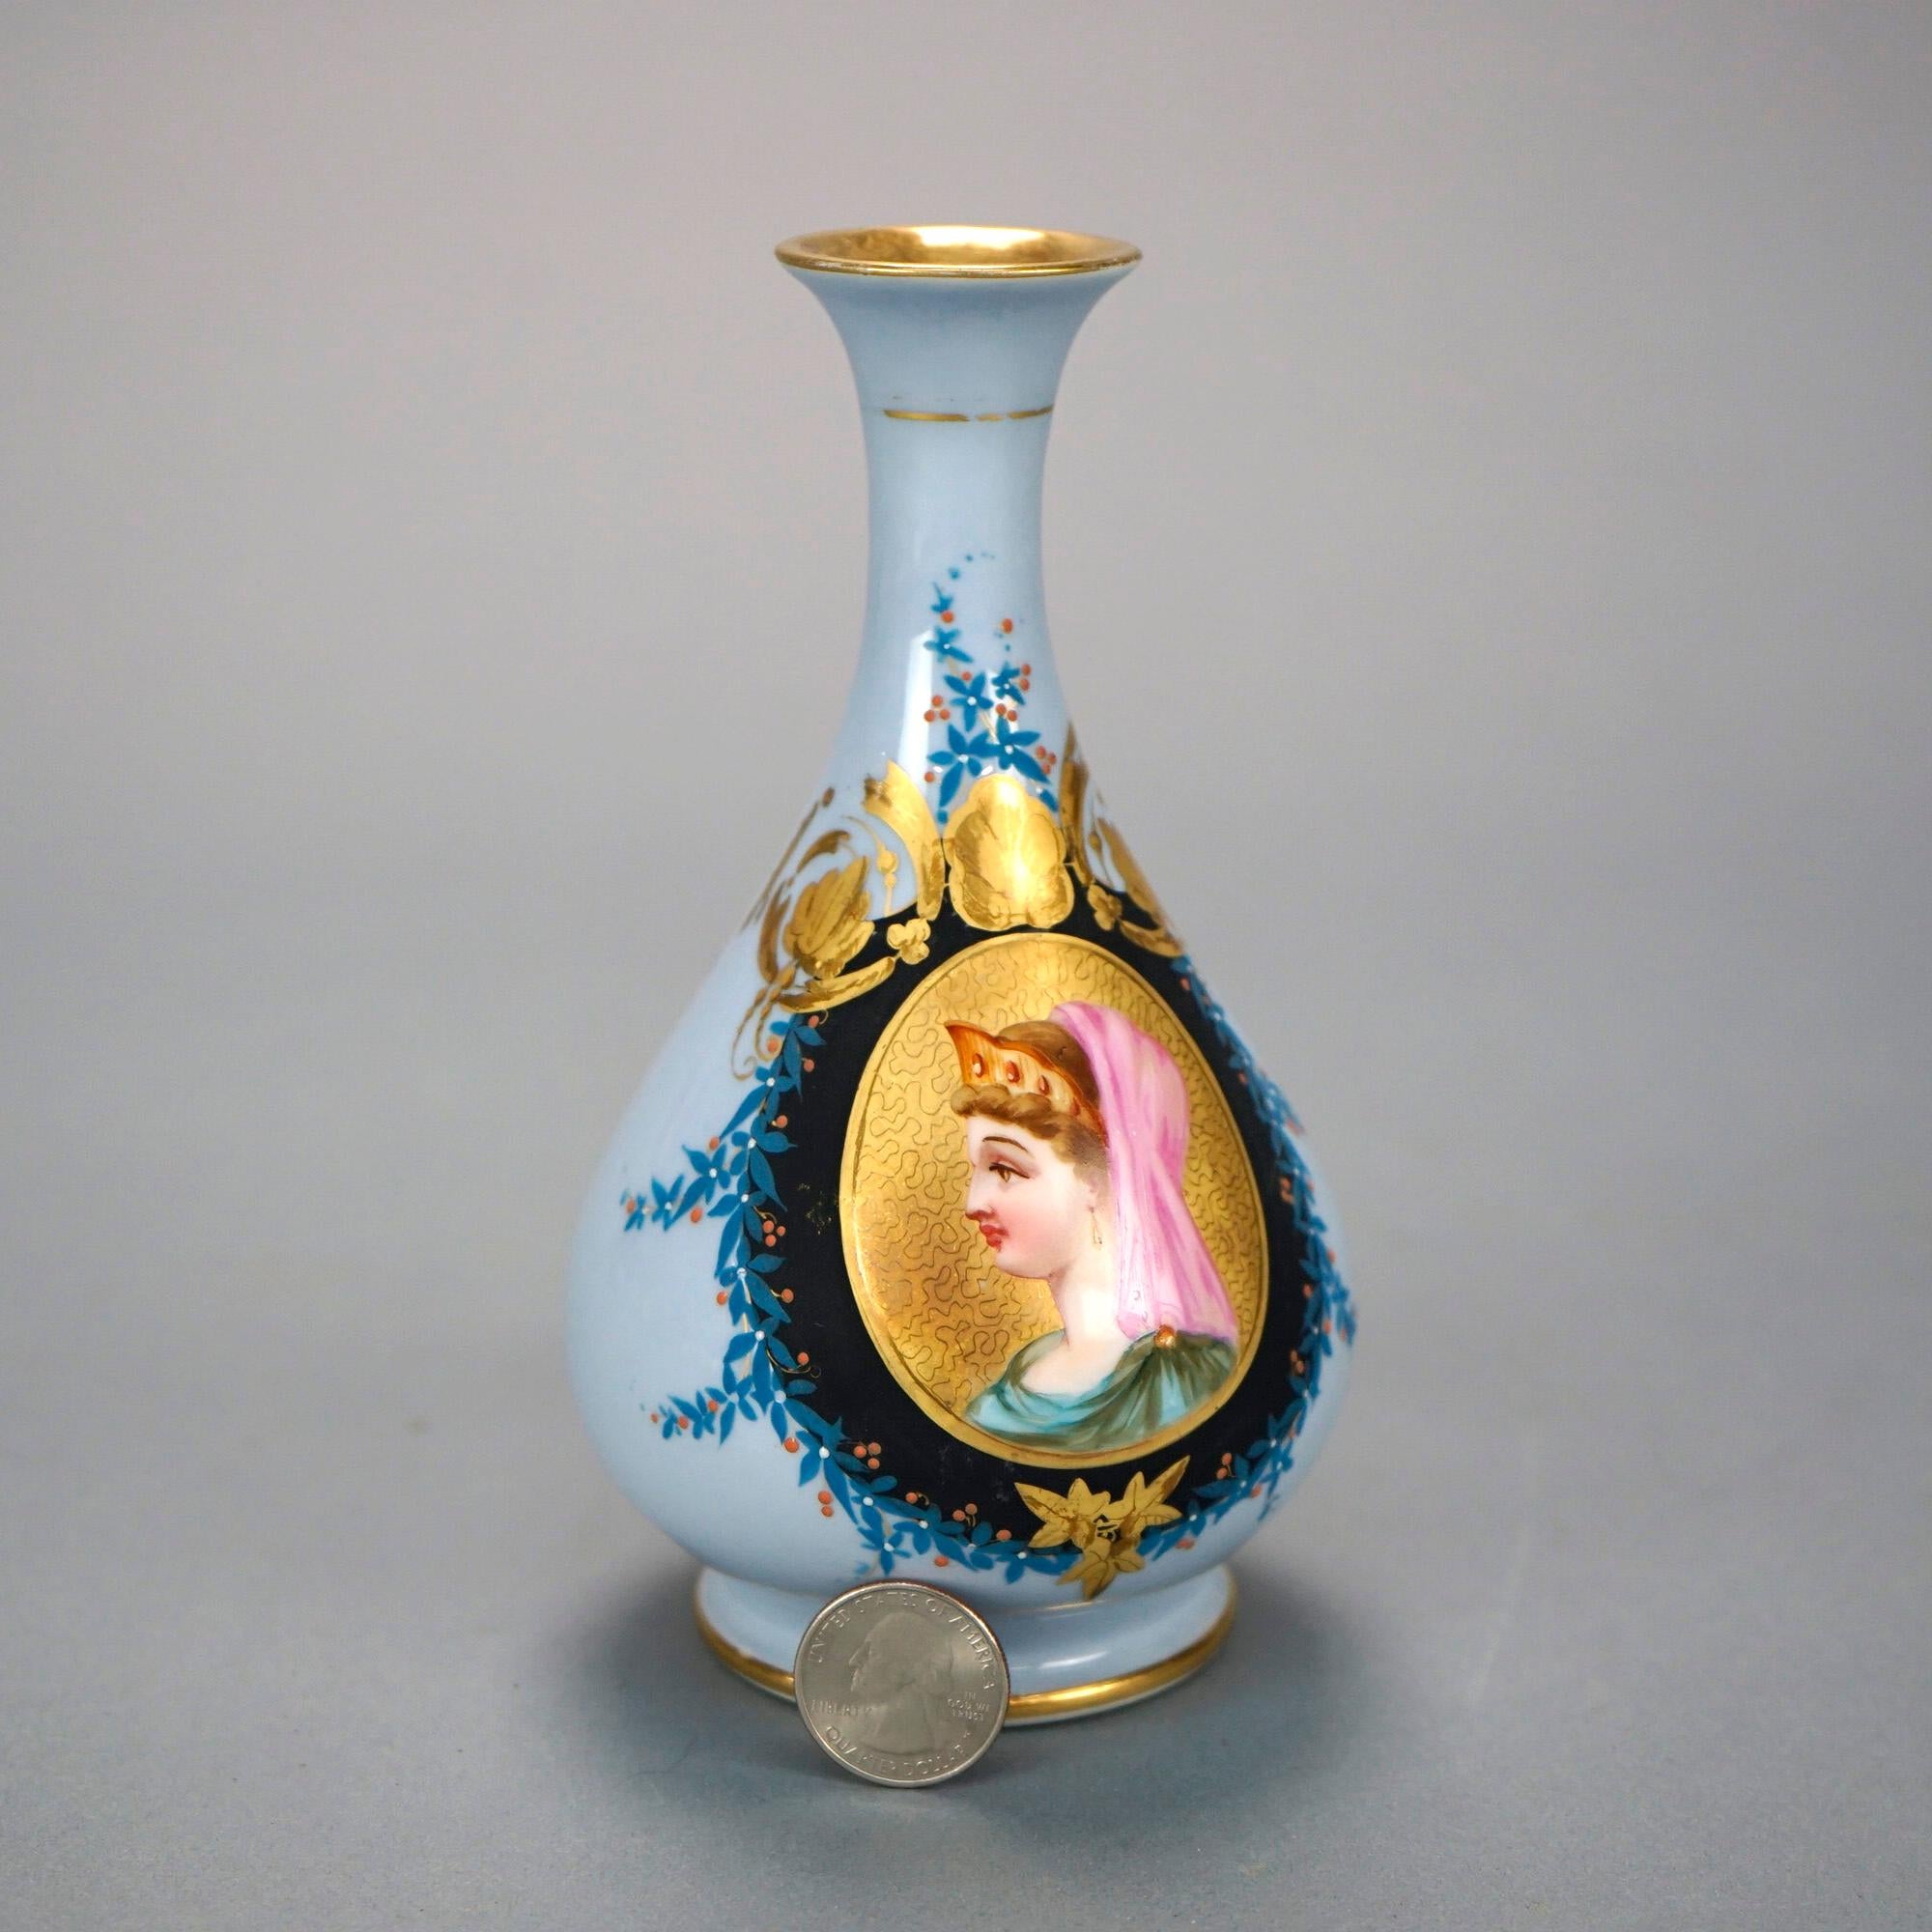 An antique French Old Paris vase offers porcelain construction with hand painted portrait of a princess, gilt highlights throughout, 19th century

Measures- 6.5'' H x 3.5'' W x 3.5'' D.